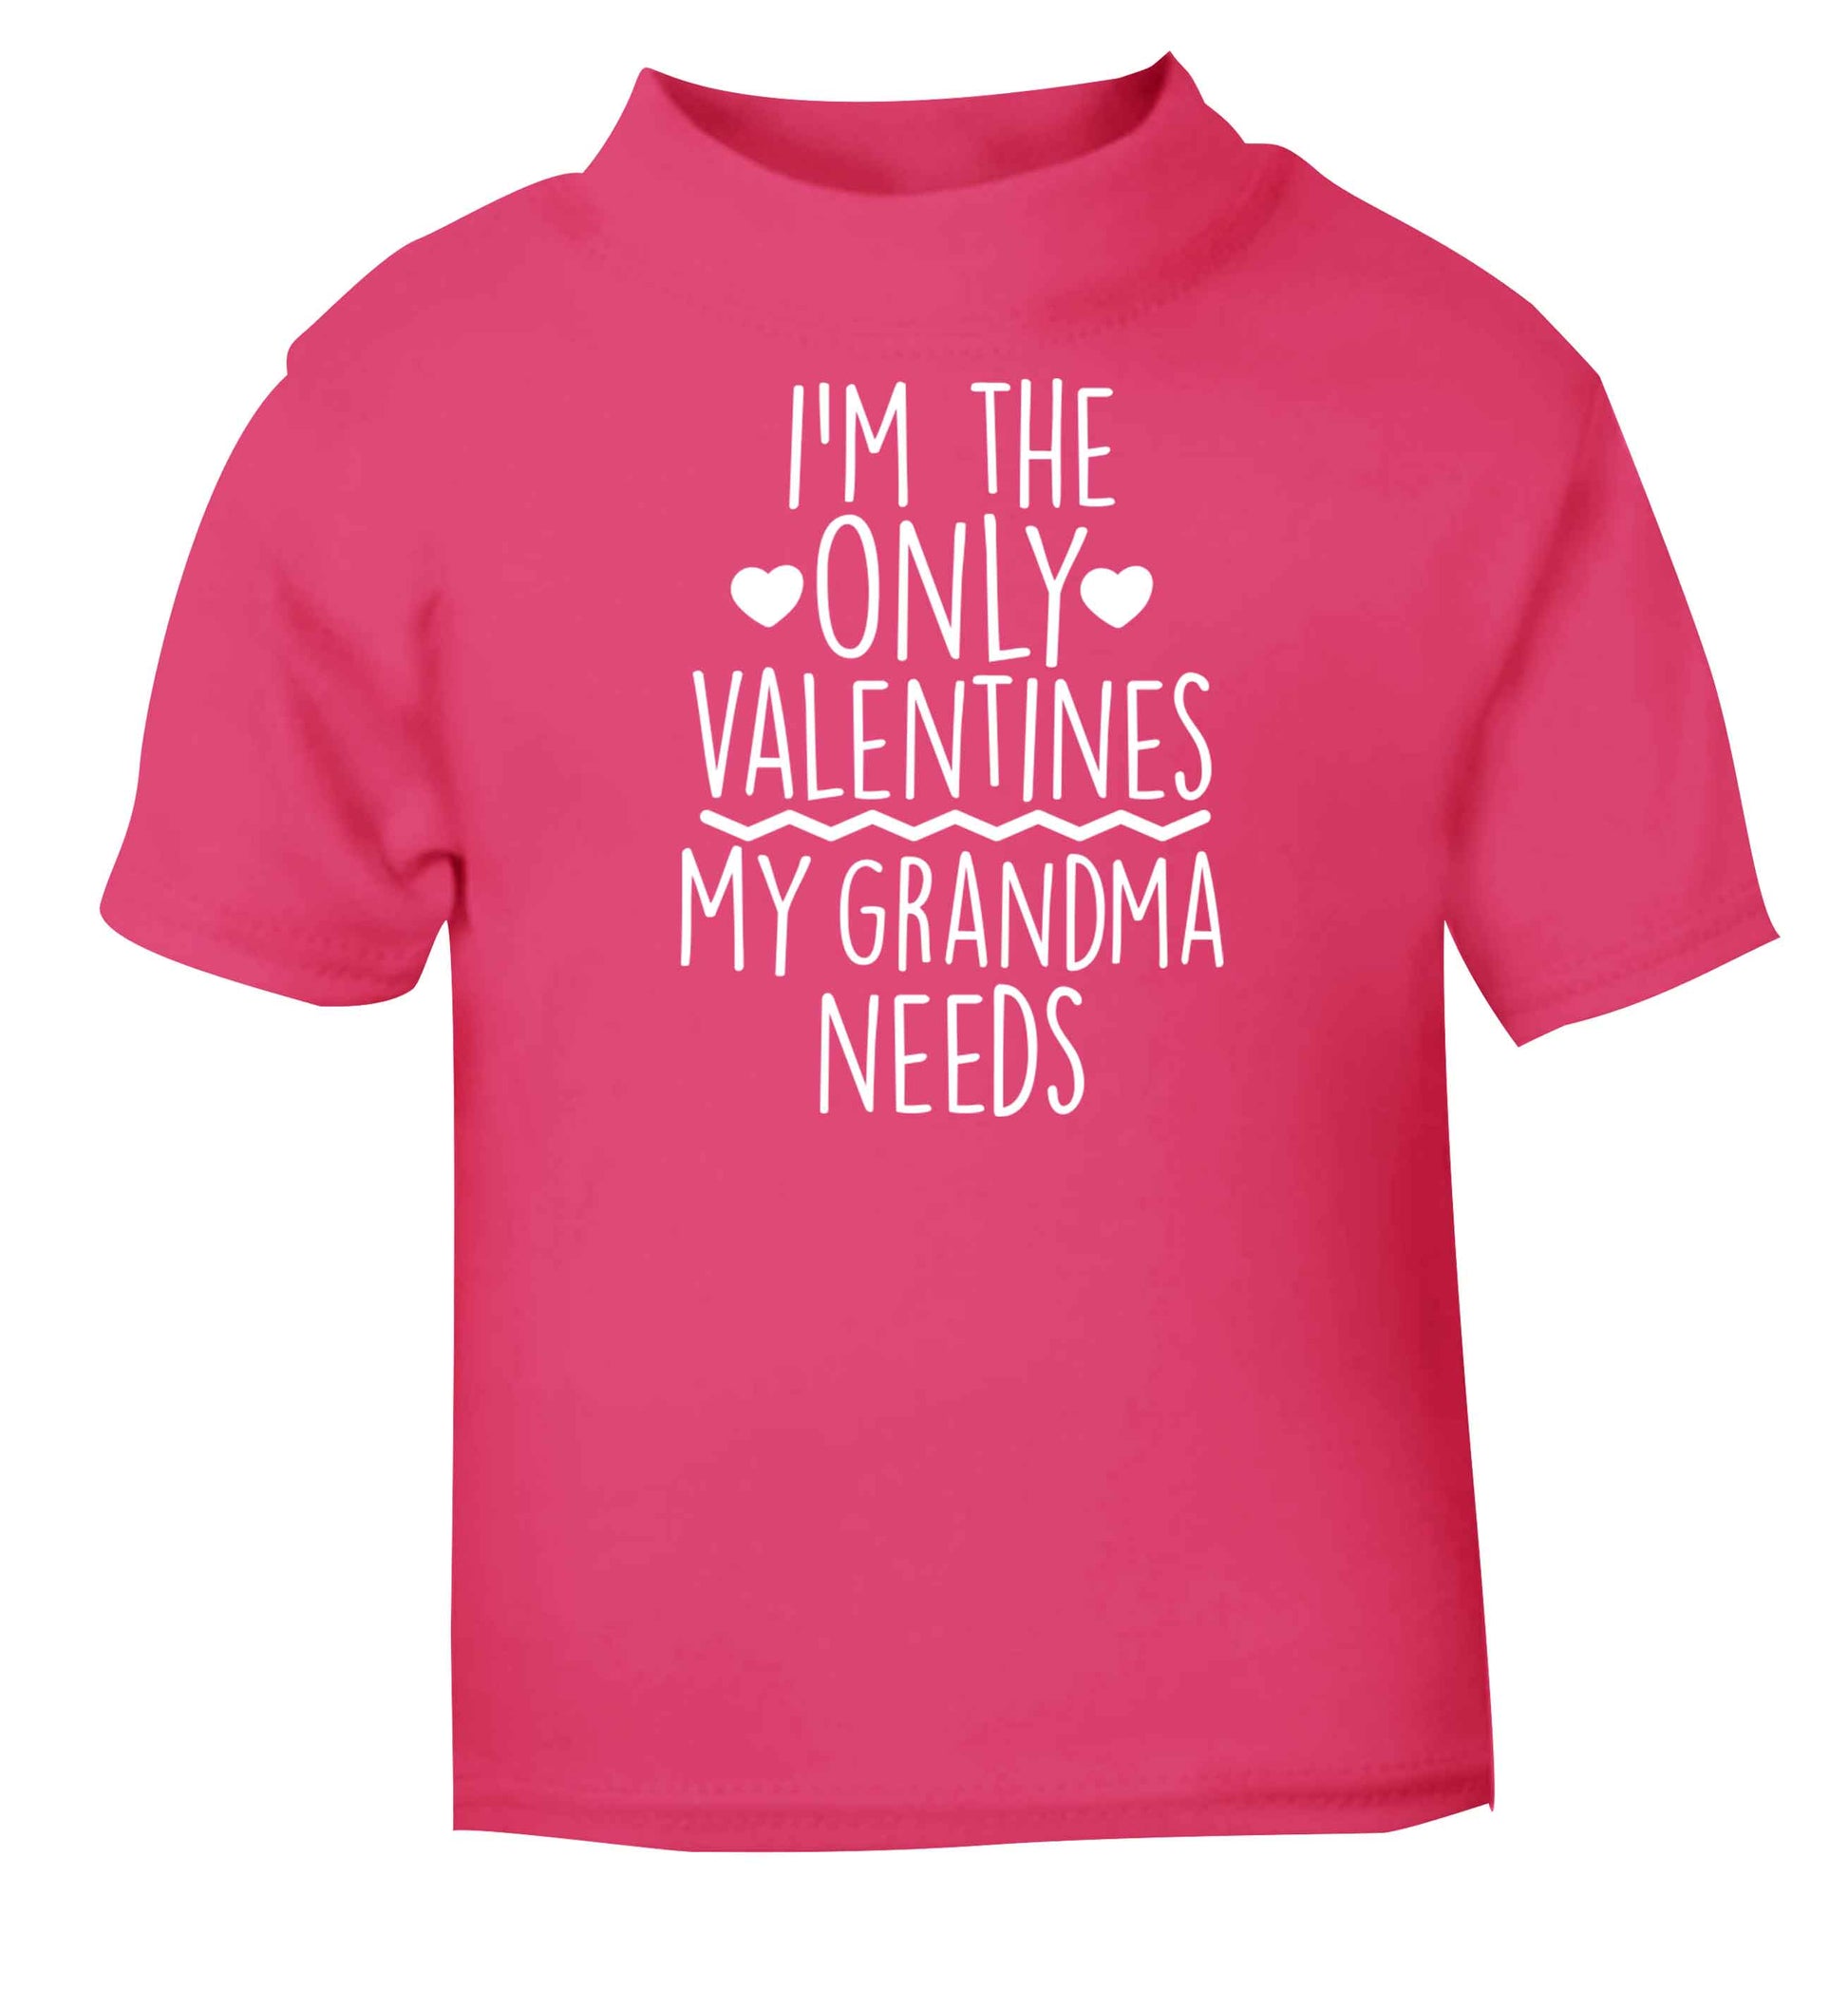 I'm the only valentines my grandma needs pink baby toddler Tshirt 2 Years